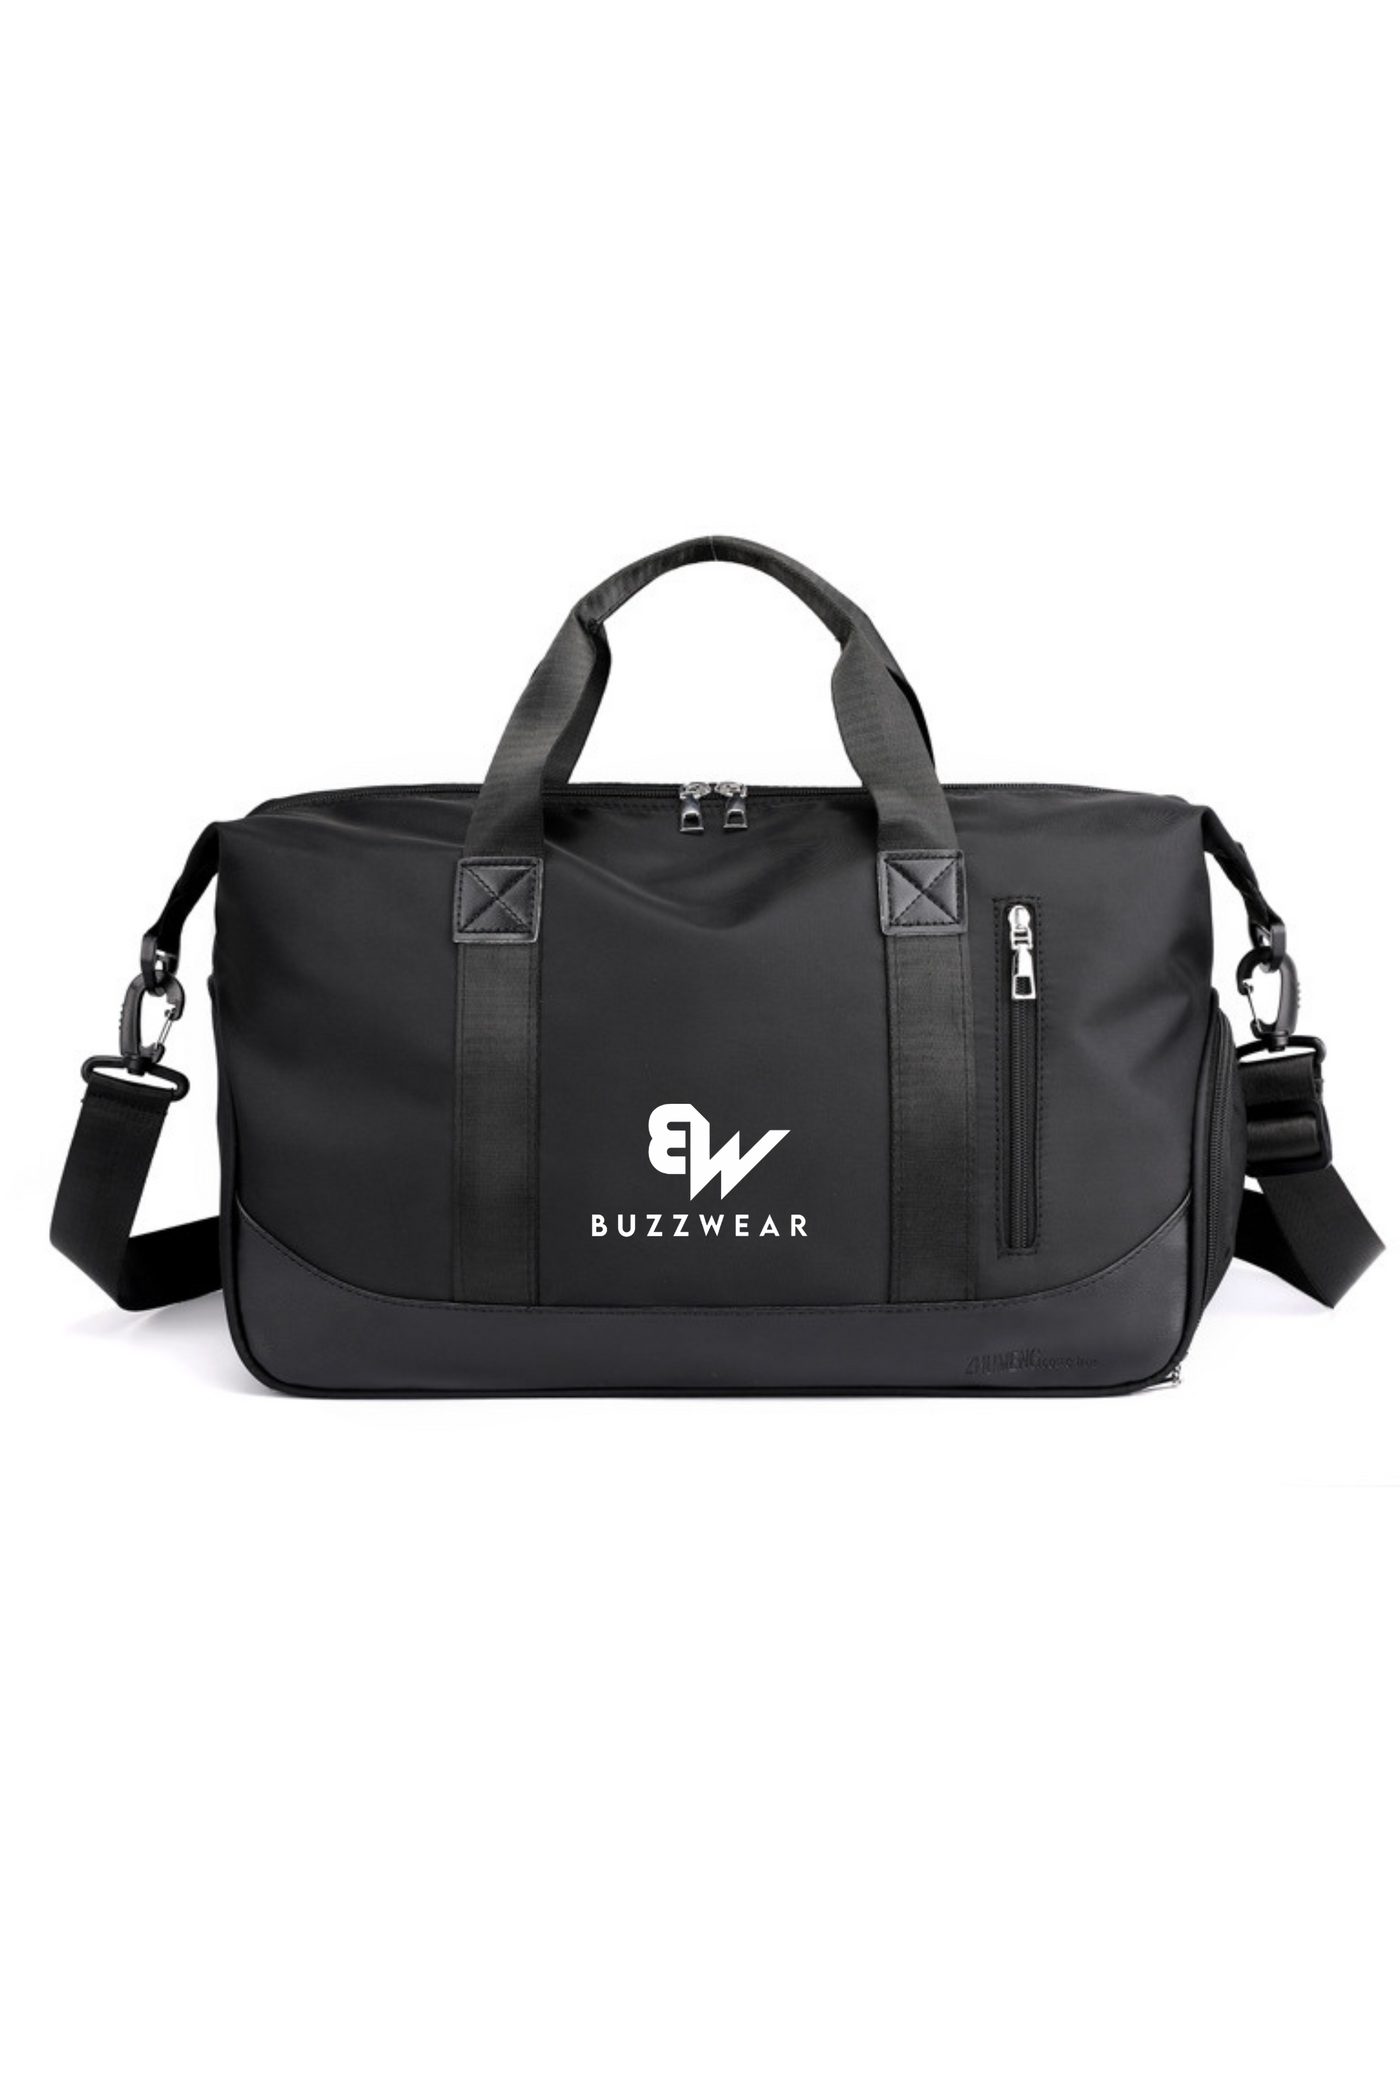 BuzzWear Water Resistant Sports Weekender Duffel Bag with shoes compartment (Black)